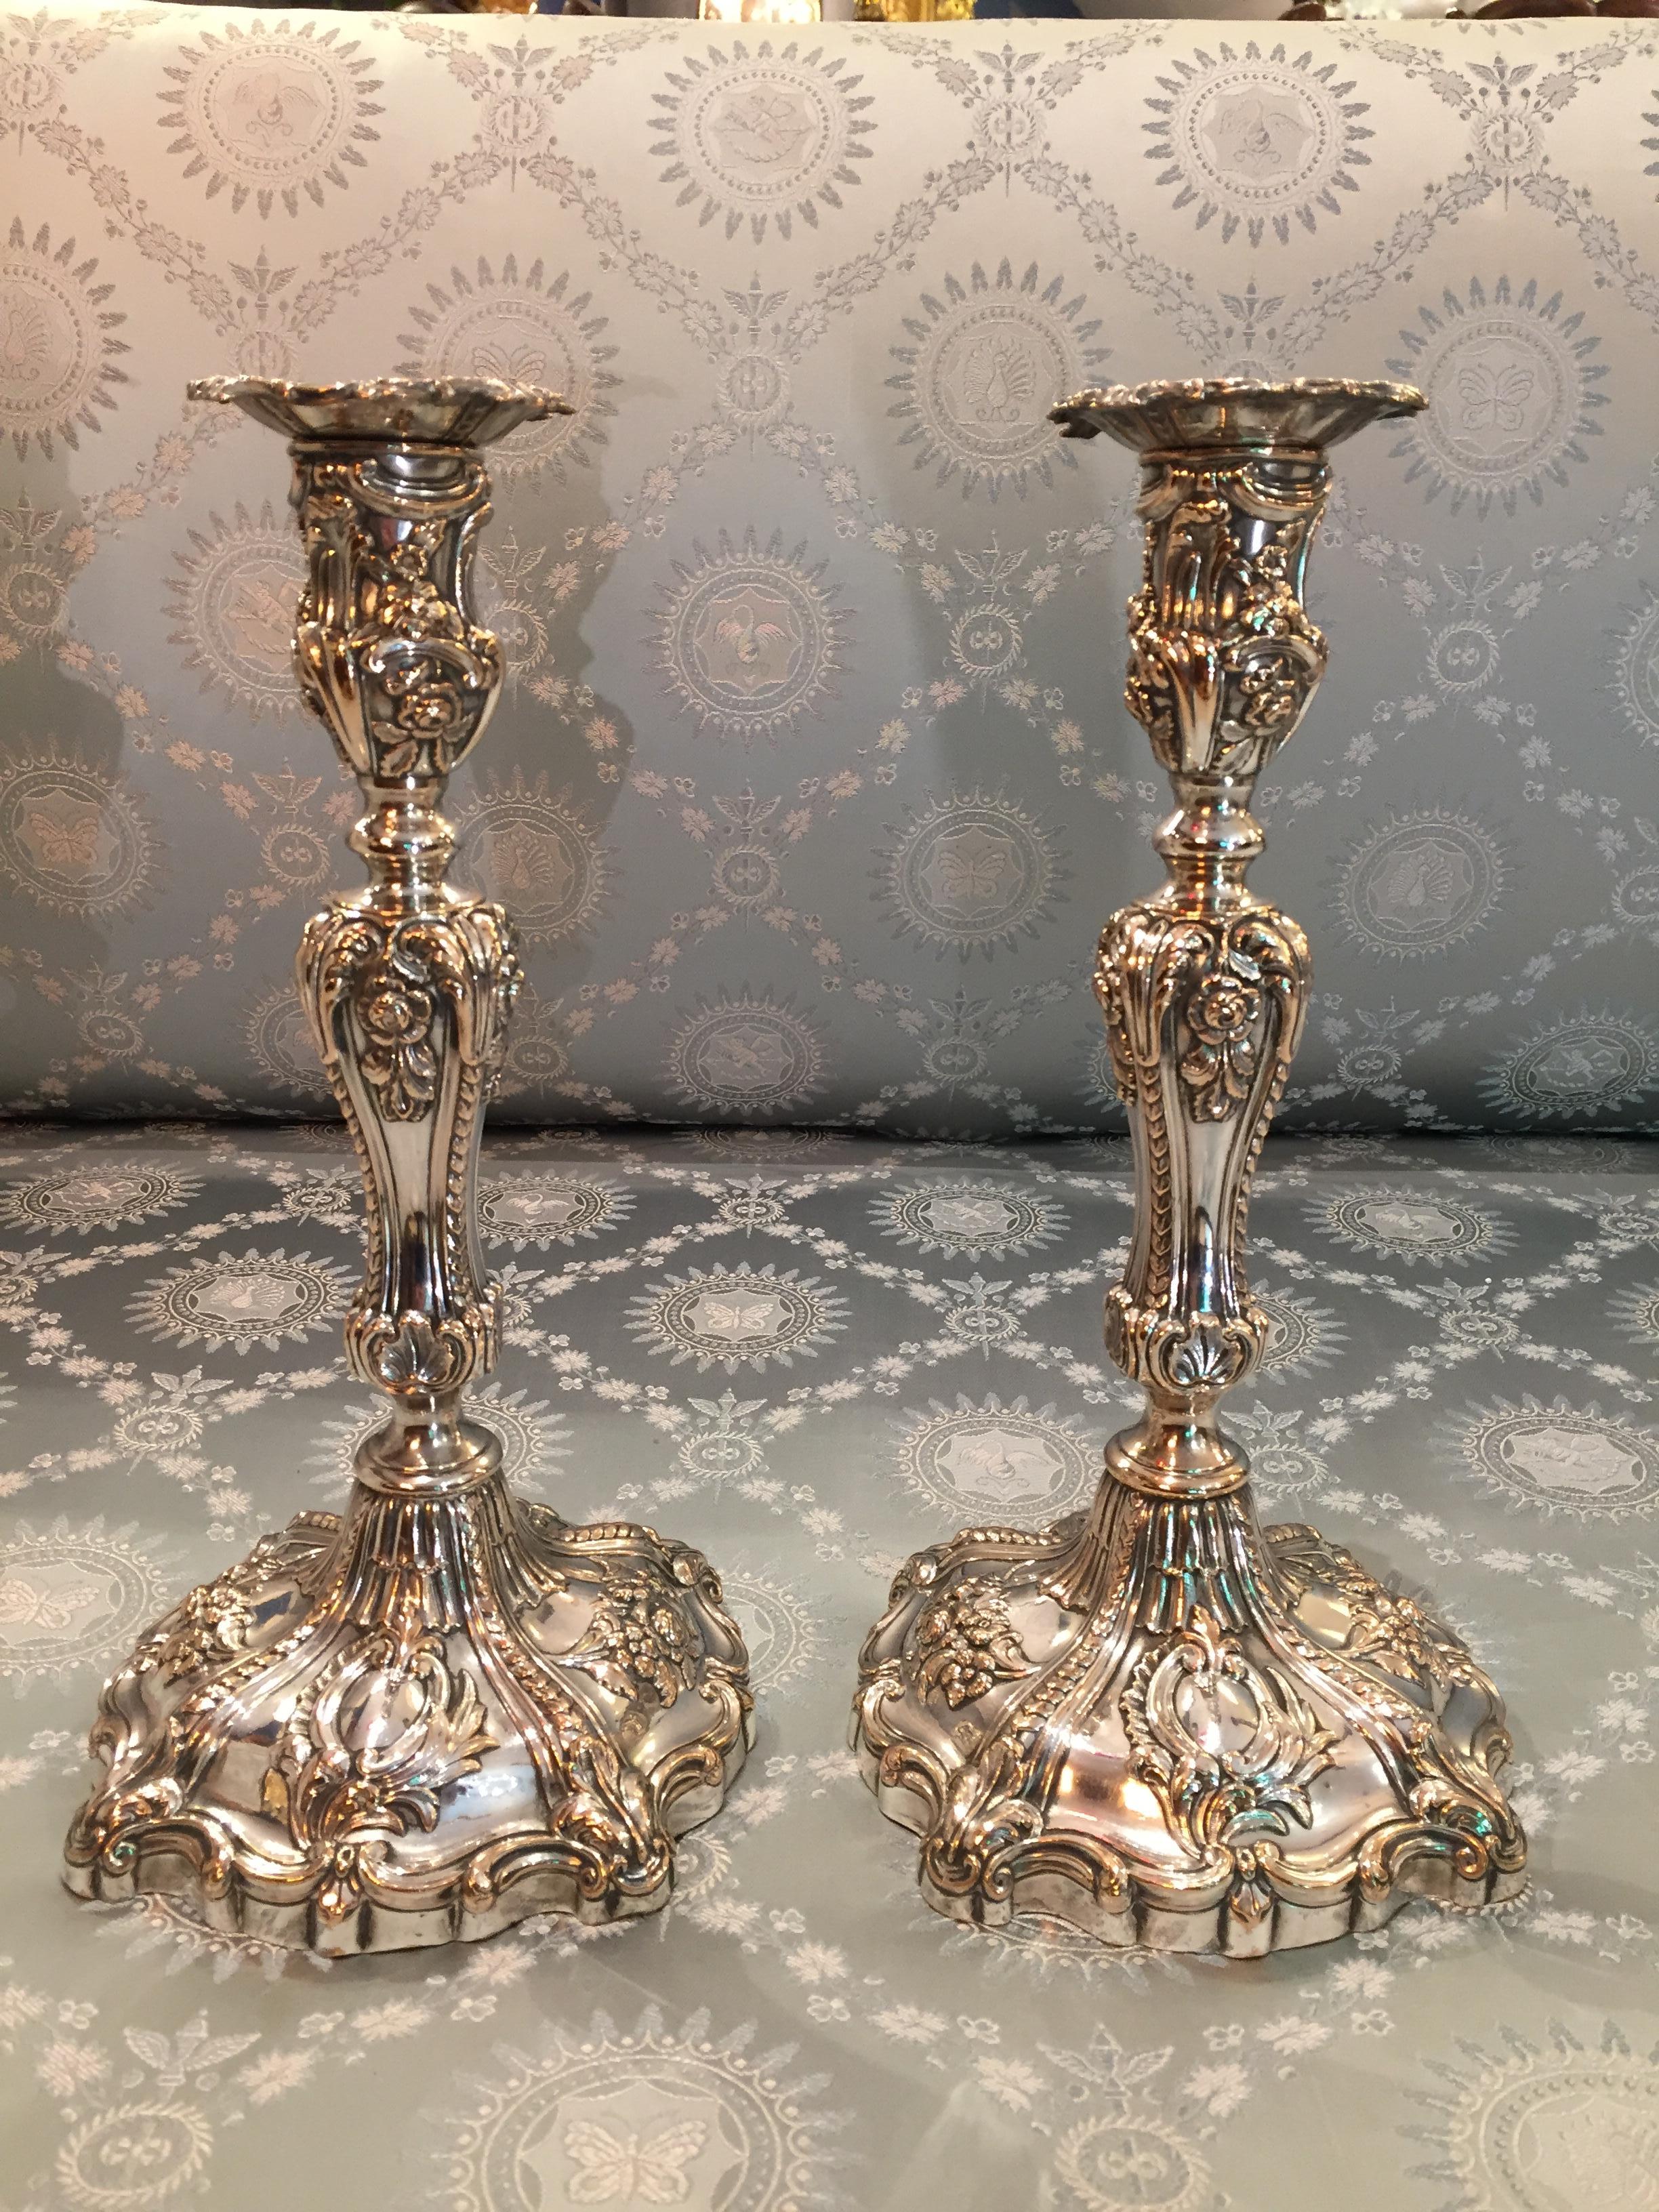 Silver Plate Regency Period Rococo Revival Sheffield Plate Candlesticks by T and J Creswick For Sale